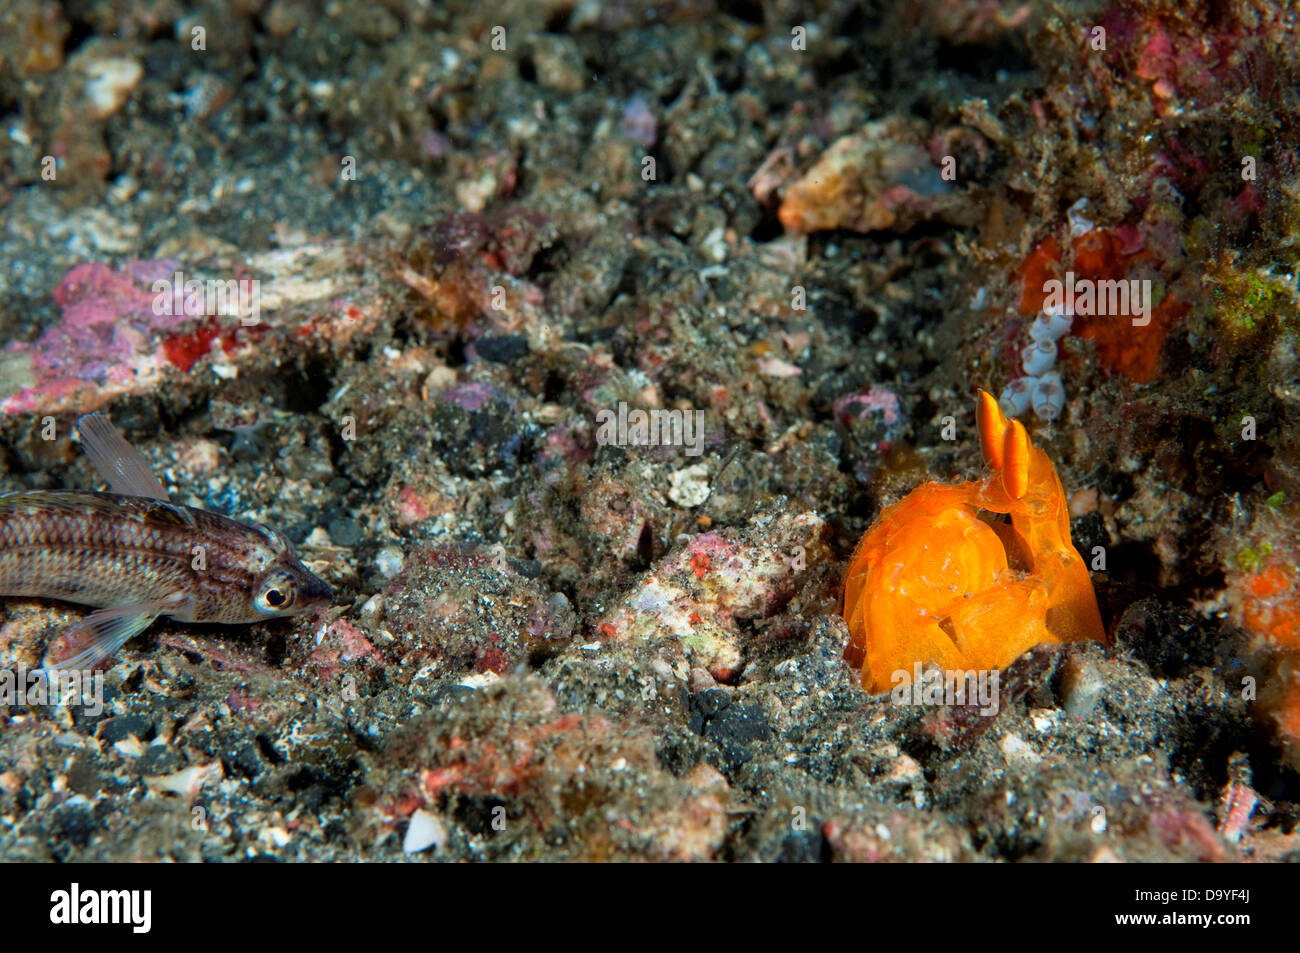 Spearing Mantis Shrimp, Lysiosquilloides Sp., Hidden in burrow watching fish, Lembeh Strait, Sulawesi, Indonesia Stock Photo